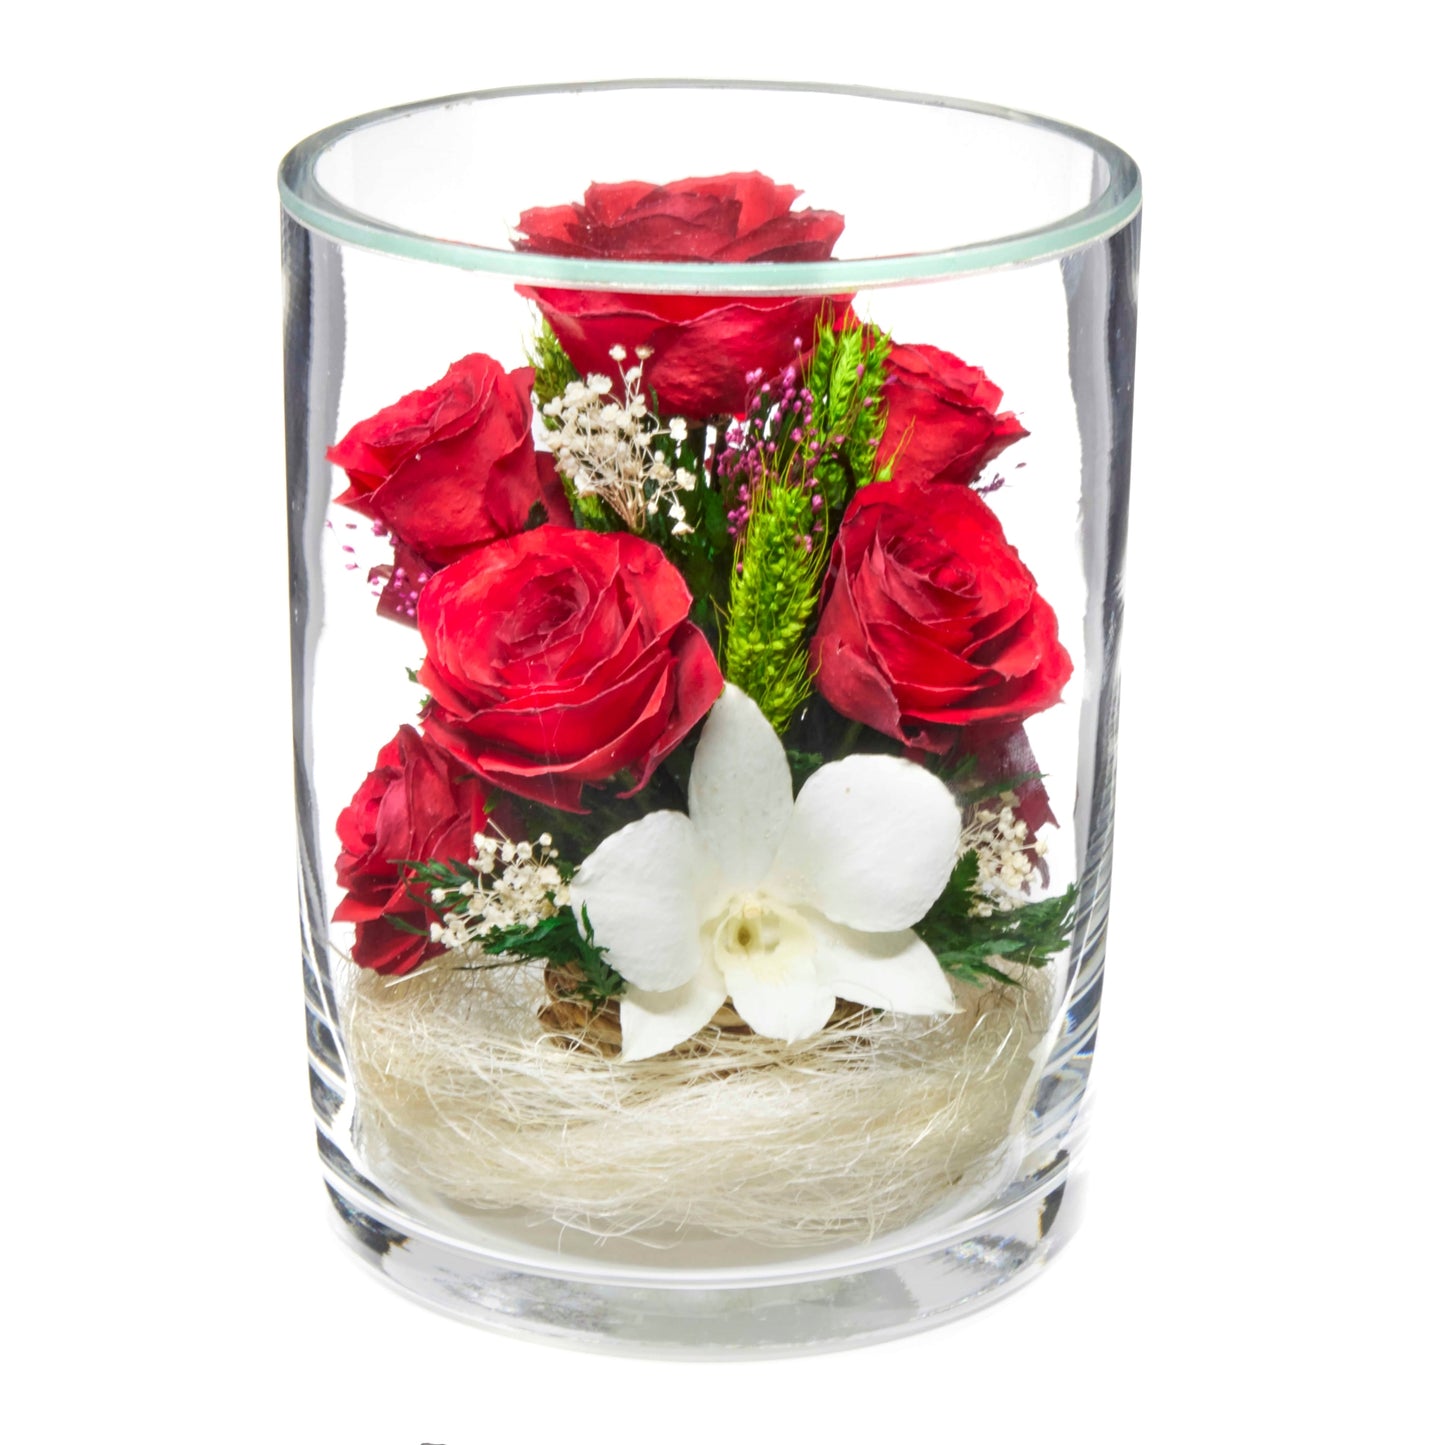 In Flores Veritas: Serene Symphony Bouquet - Lasts up to 5 Years - Elegant Gift for Any Occasion